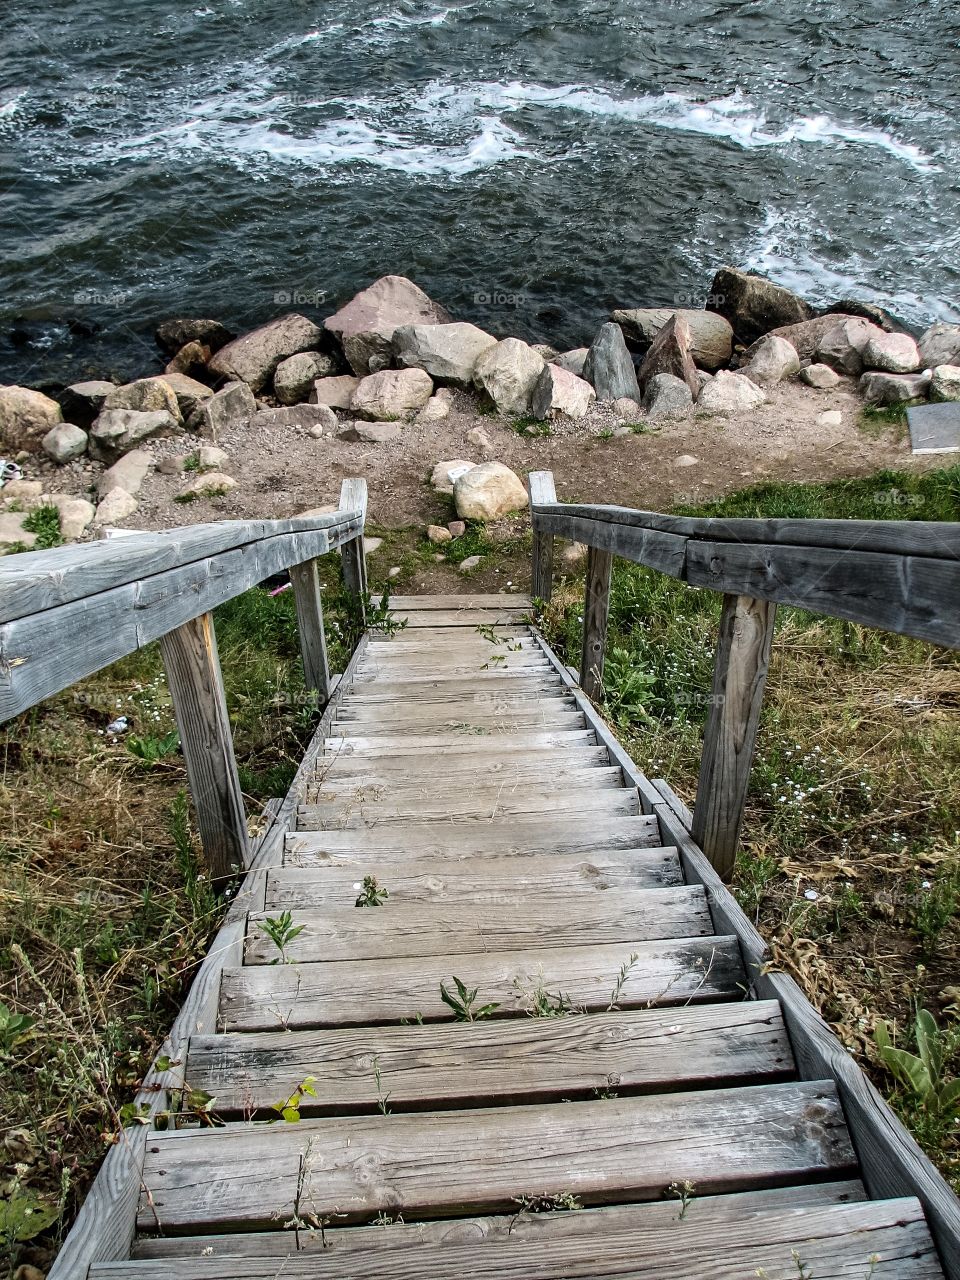 Stairway to the beaches 